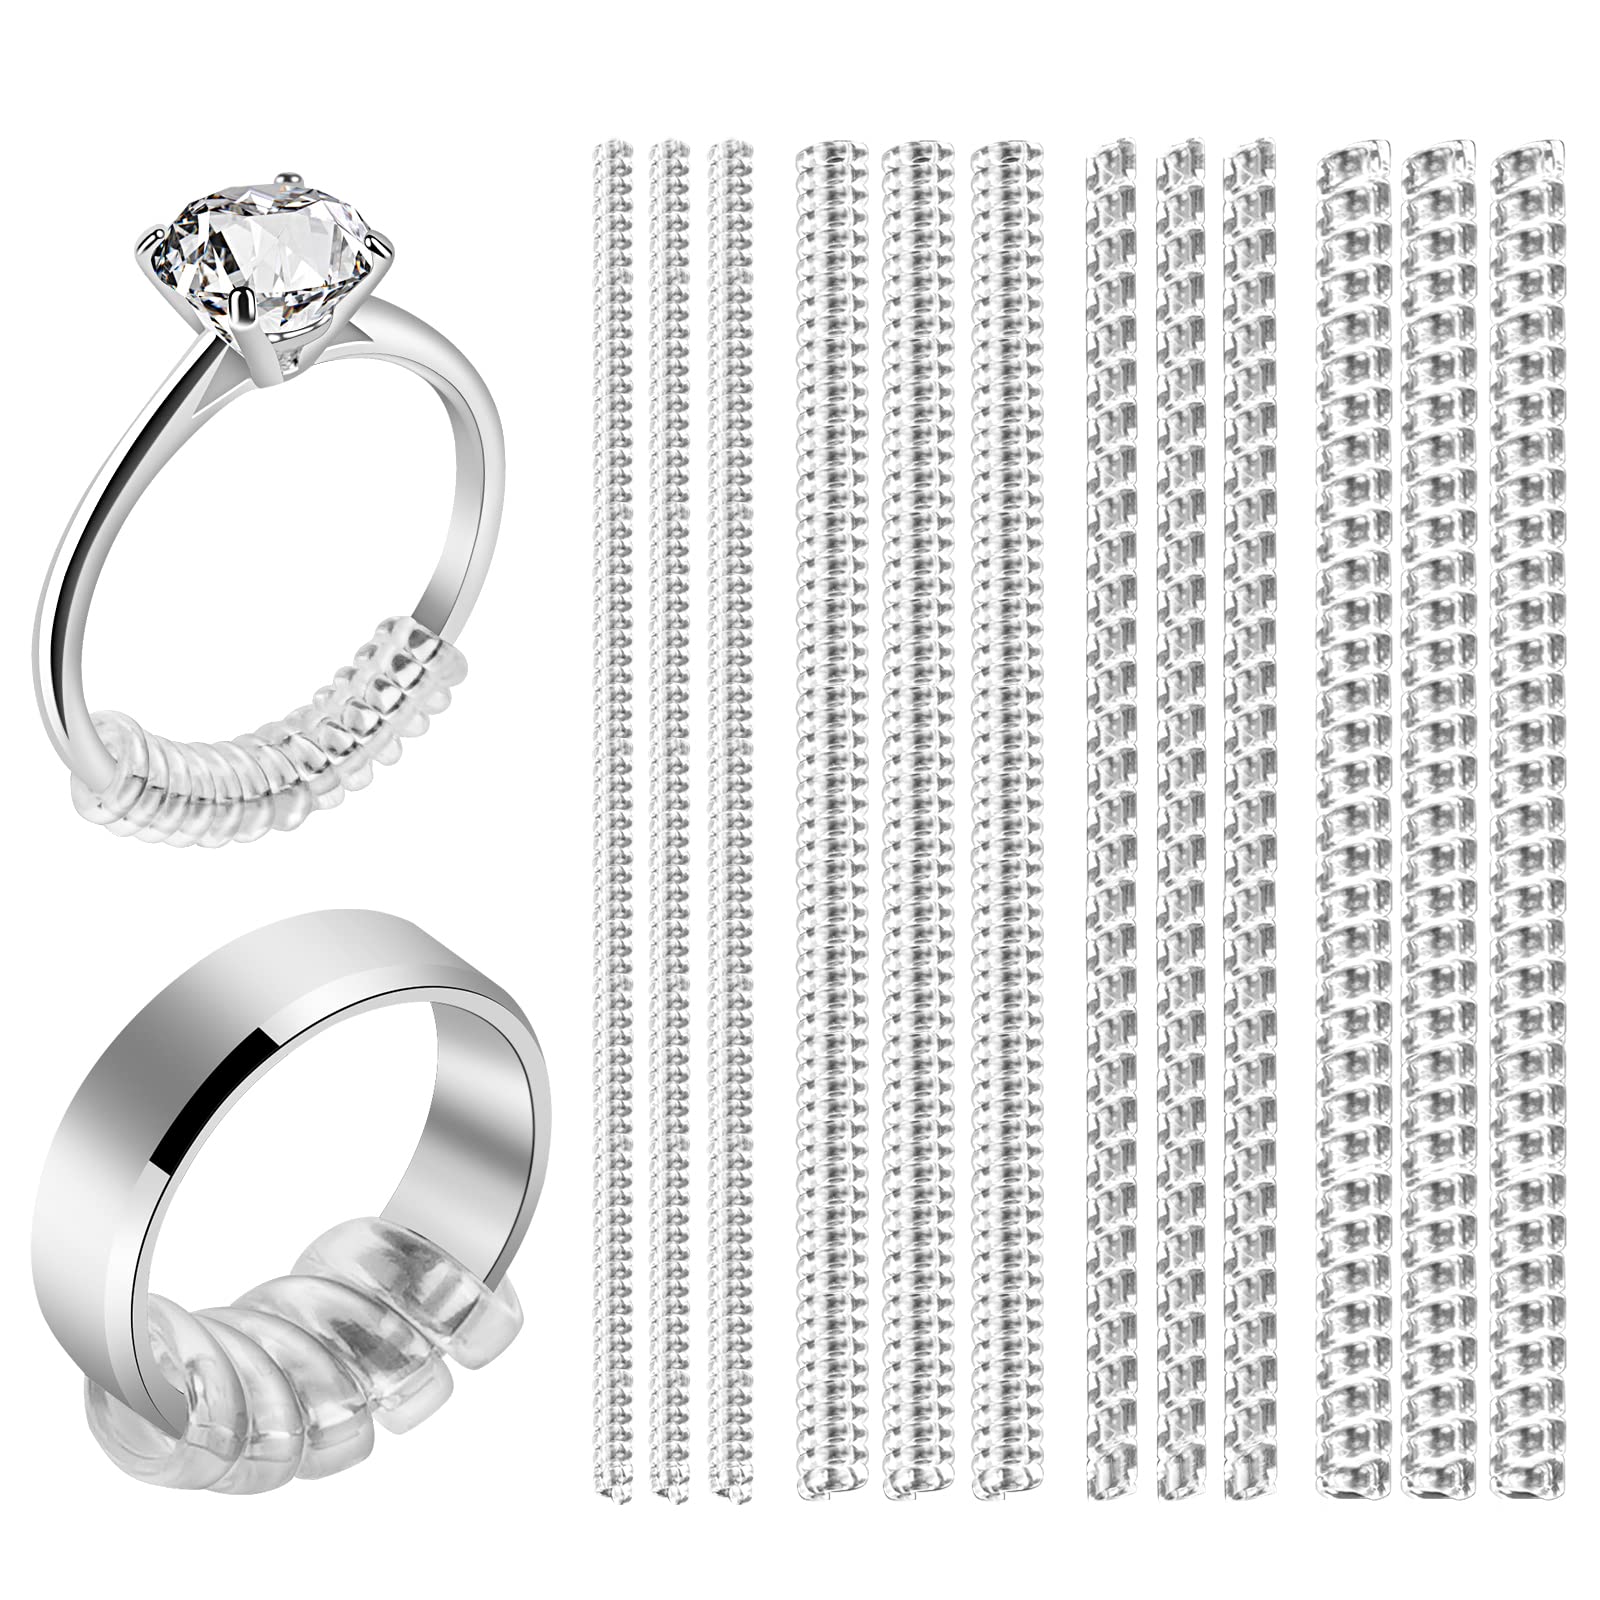 Hicarer Ring Size Adjusters Set for Loosing Rings 2 Styles, 12 Sizes, Ring  Size Reducer Spacer Ring Guard Ring Resizer Tightener with Ring Sizer